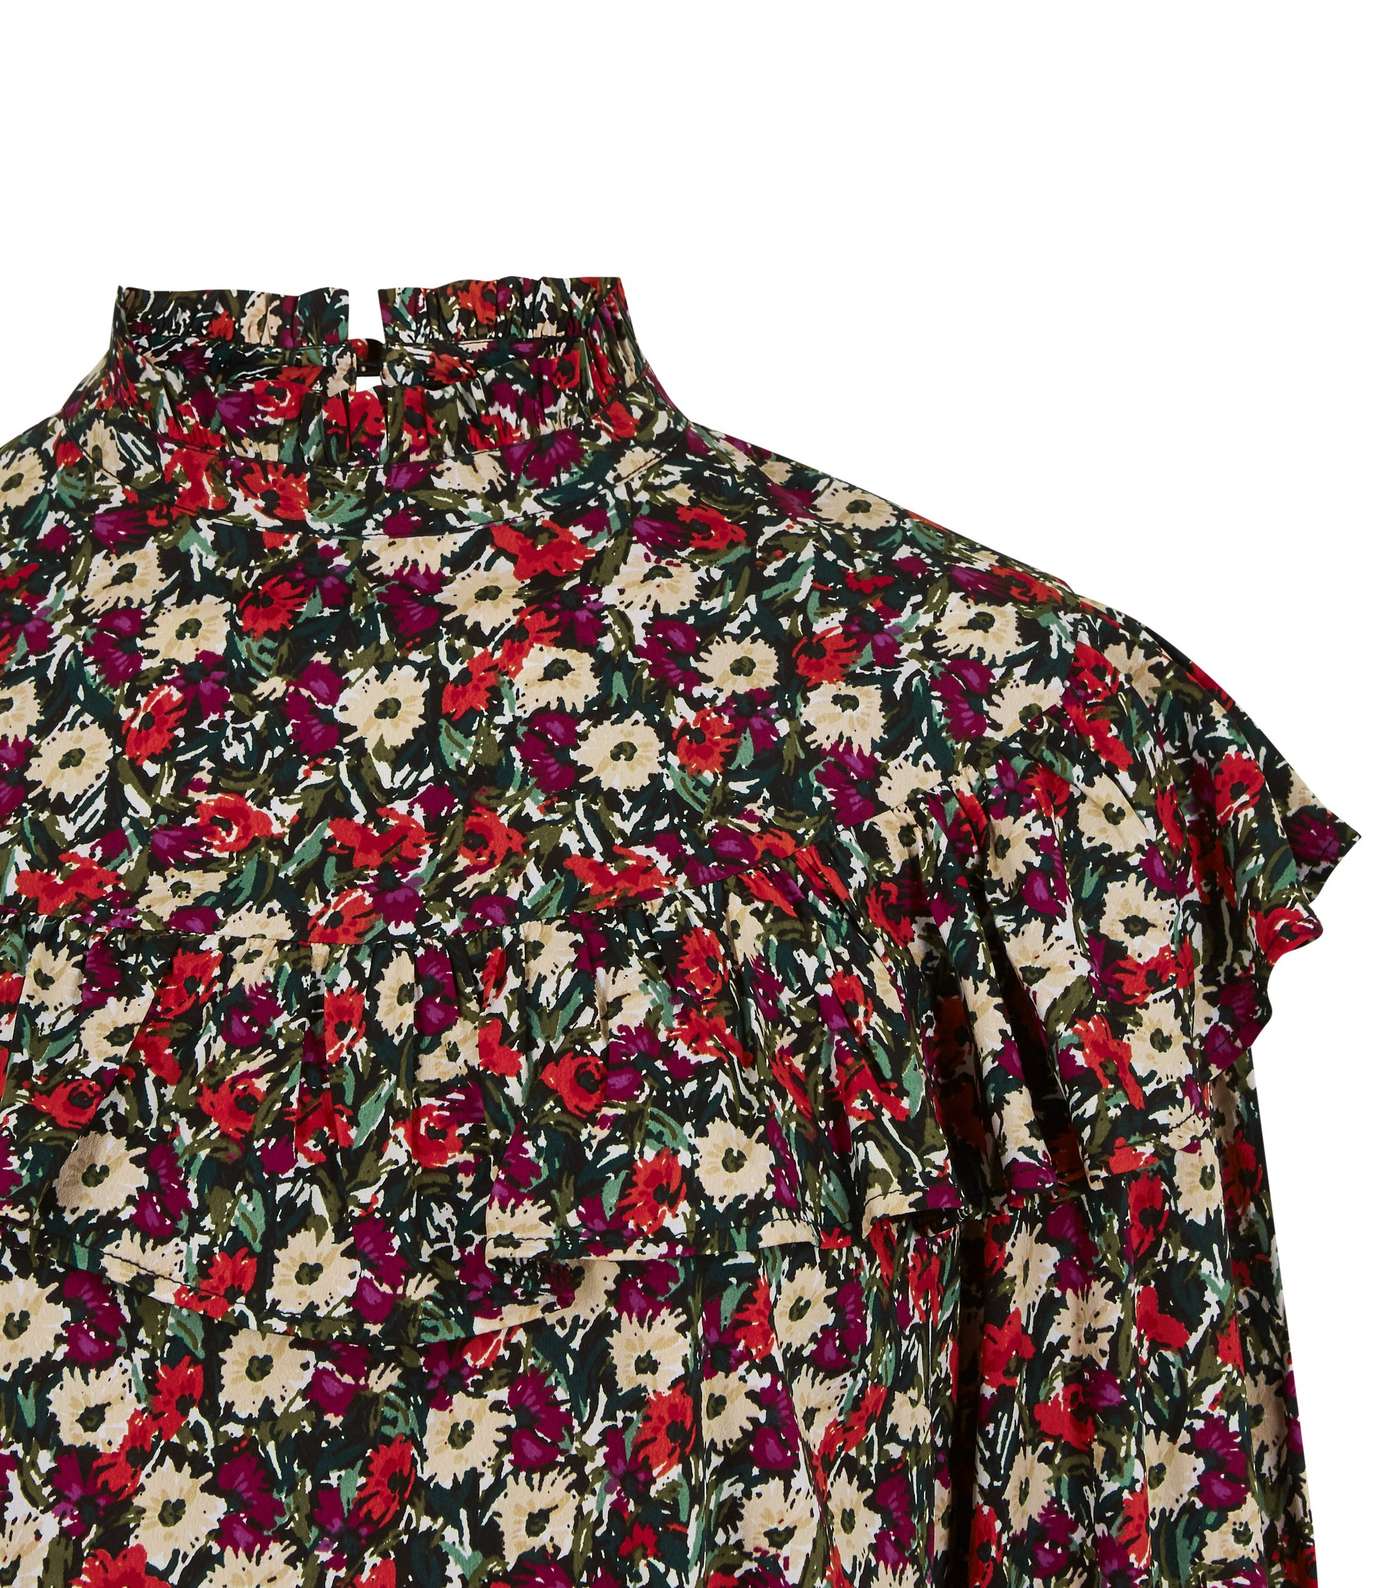 Red Floral Frill Trim High Neck Blouse Image 3